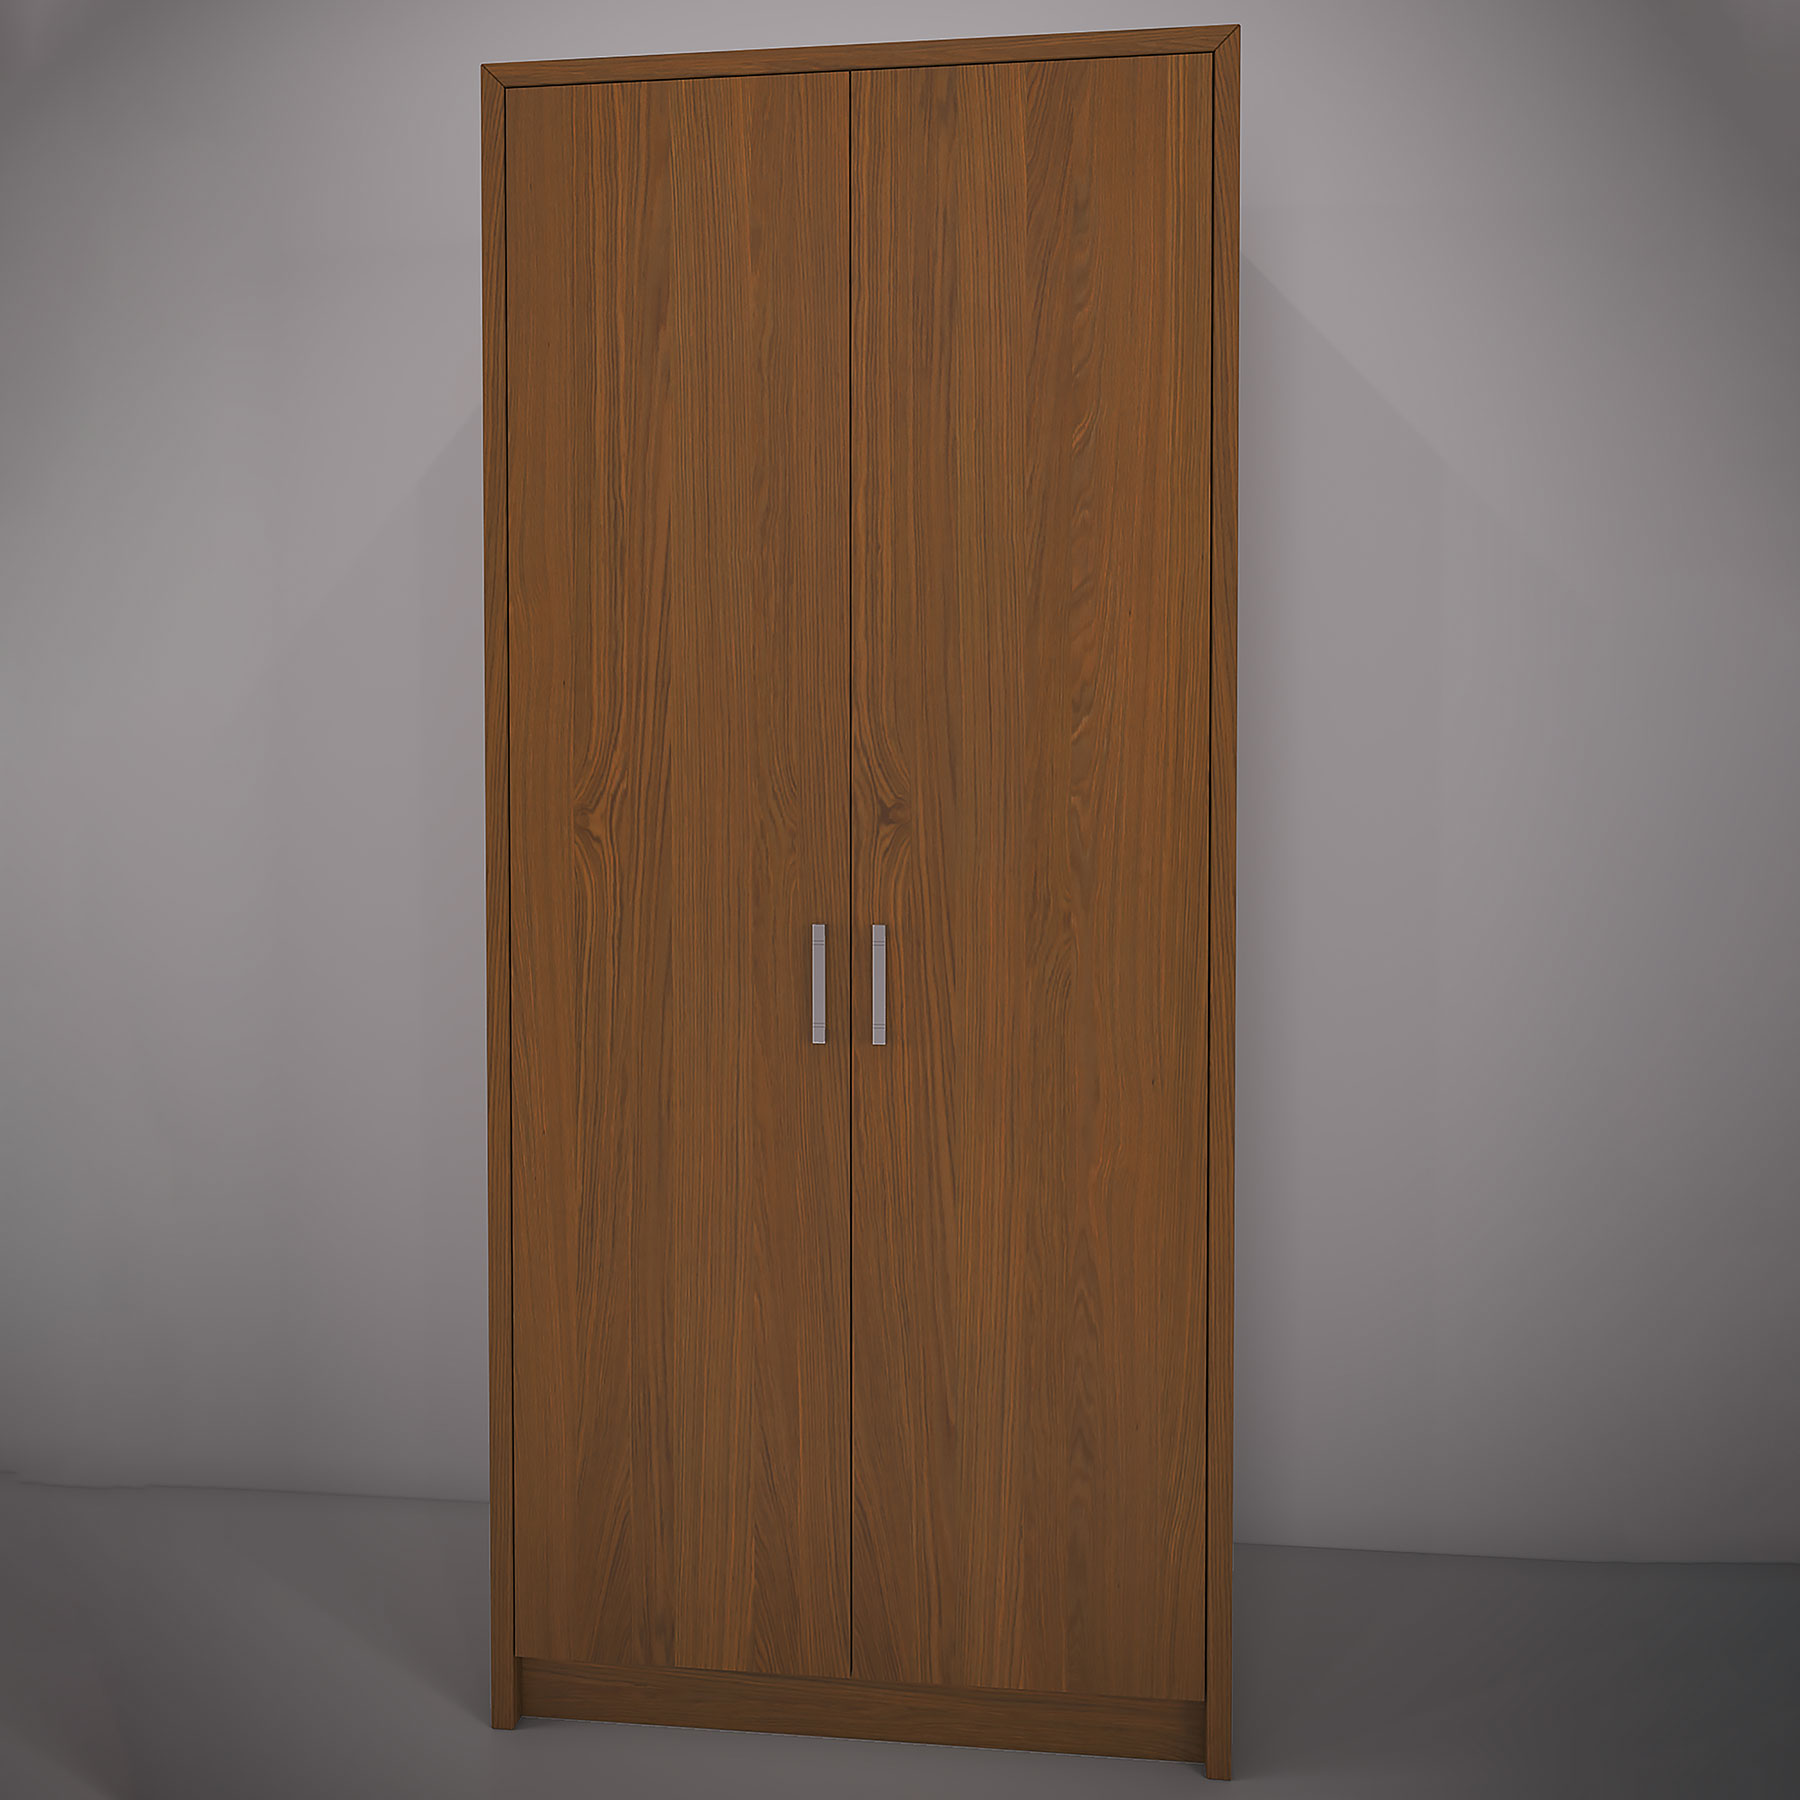 Two-door wardrobe from the Verona collection 2